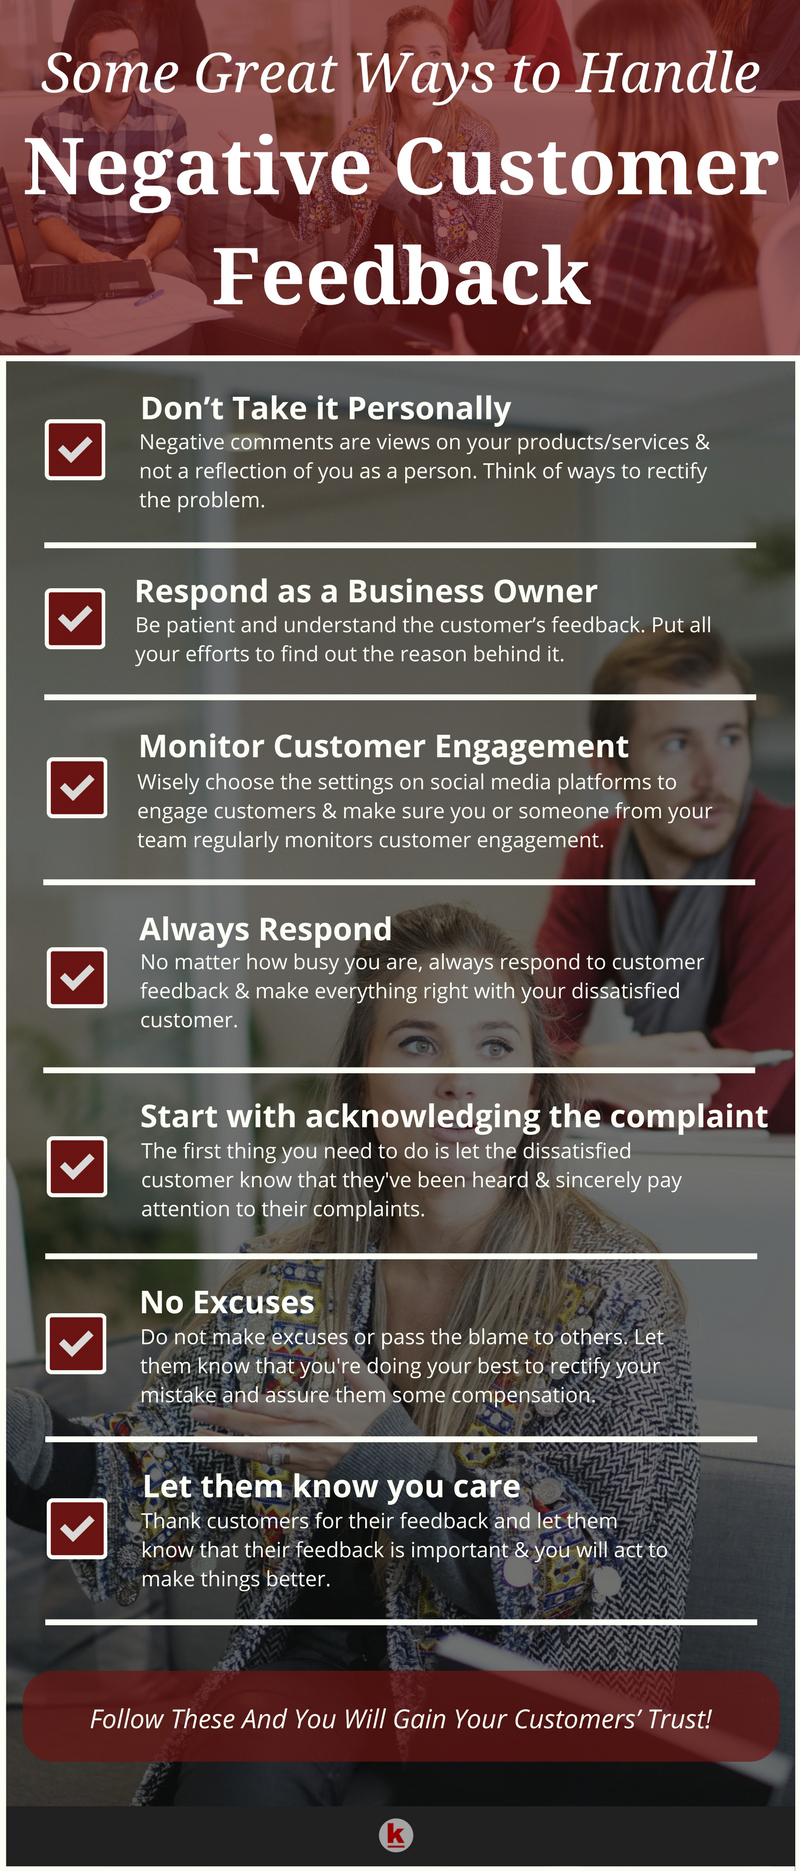 Tips for managing response to customers negative feedback & comments on social media platforms - RedAlkemi